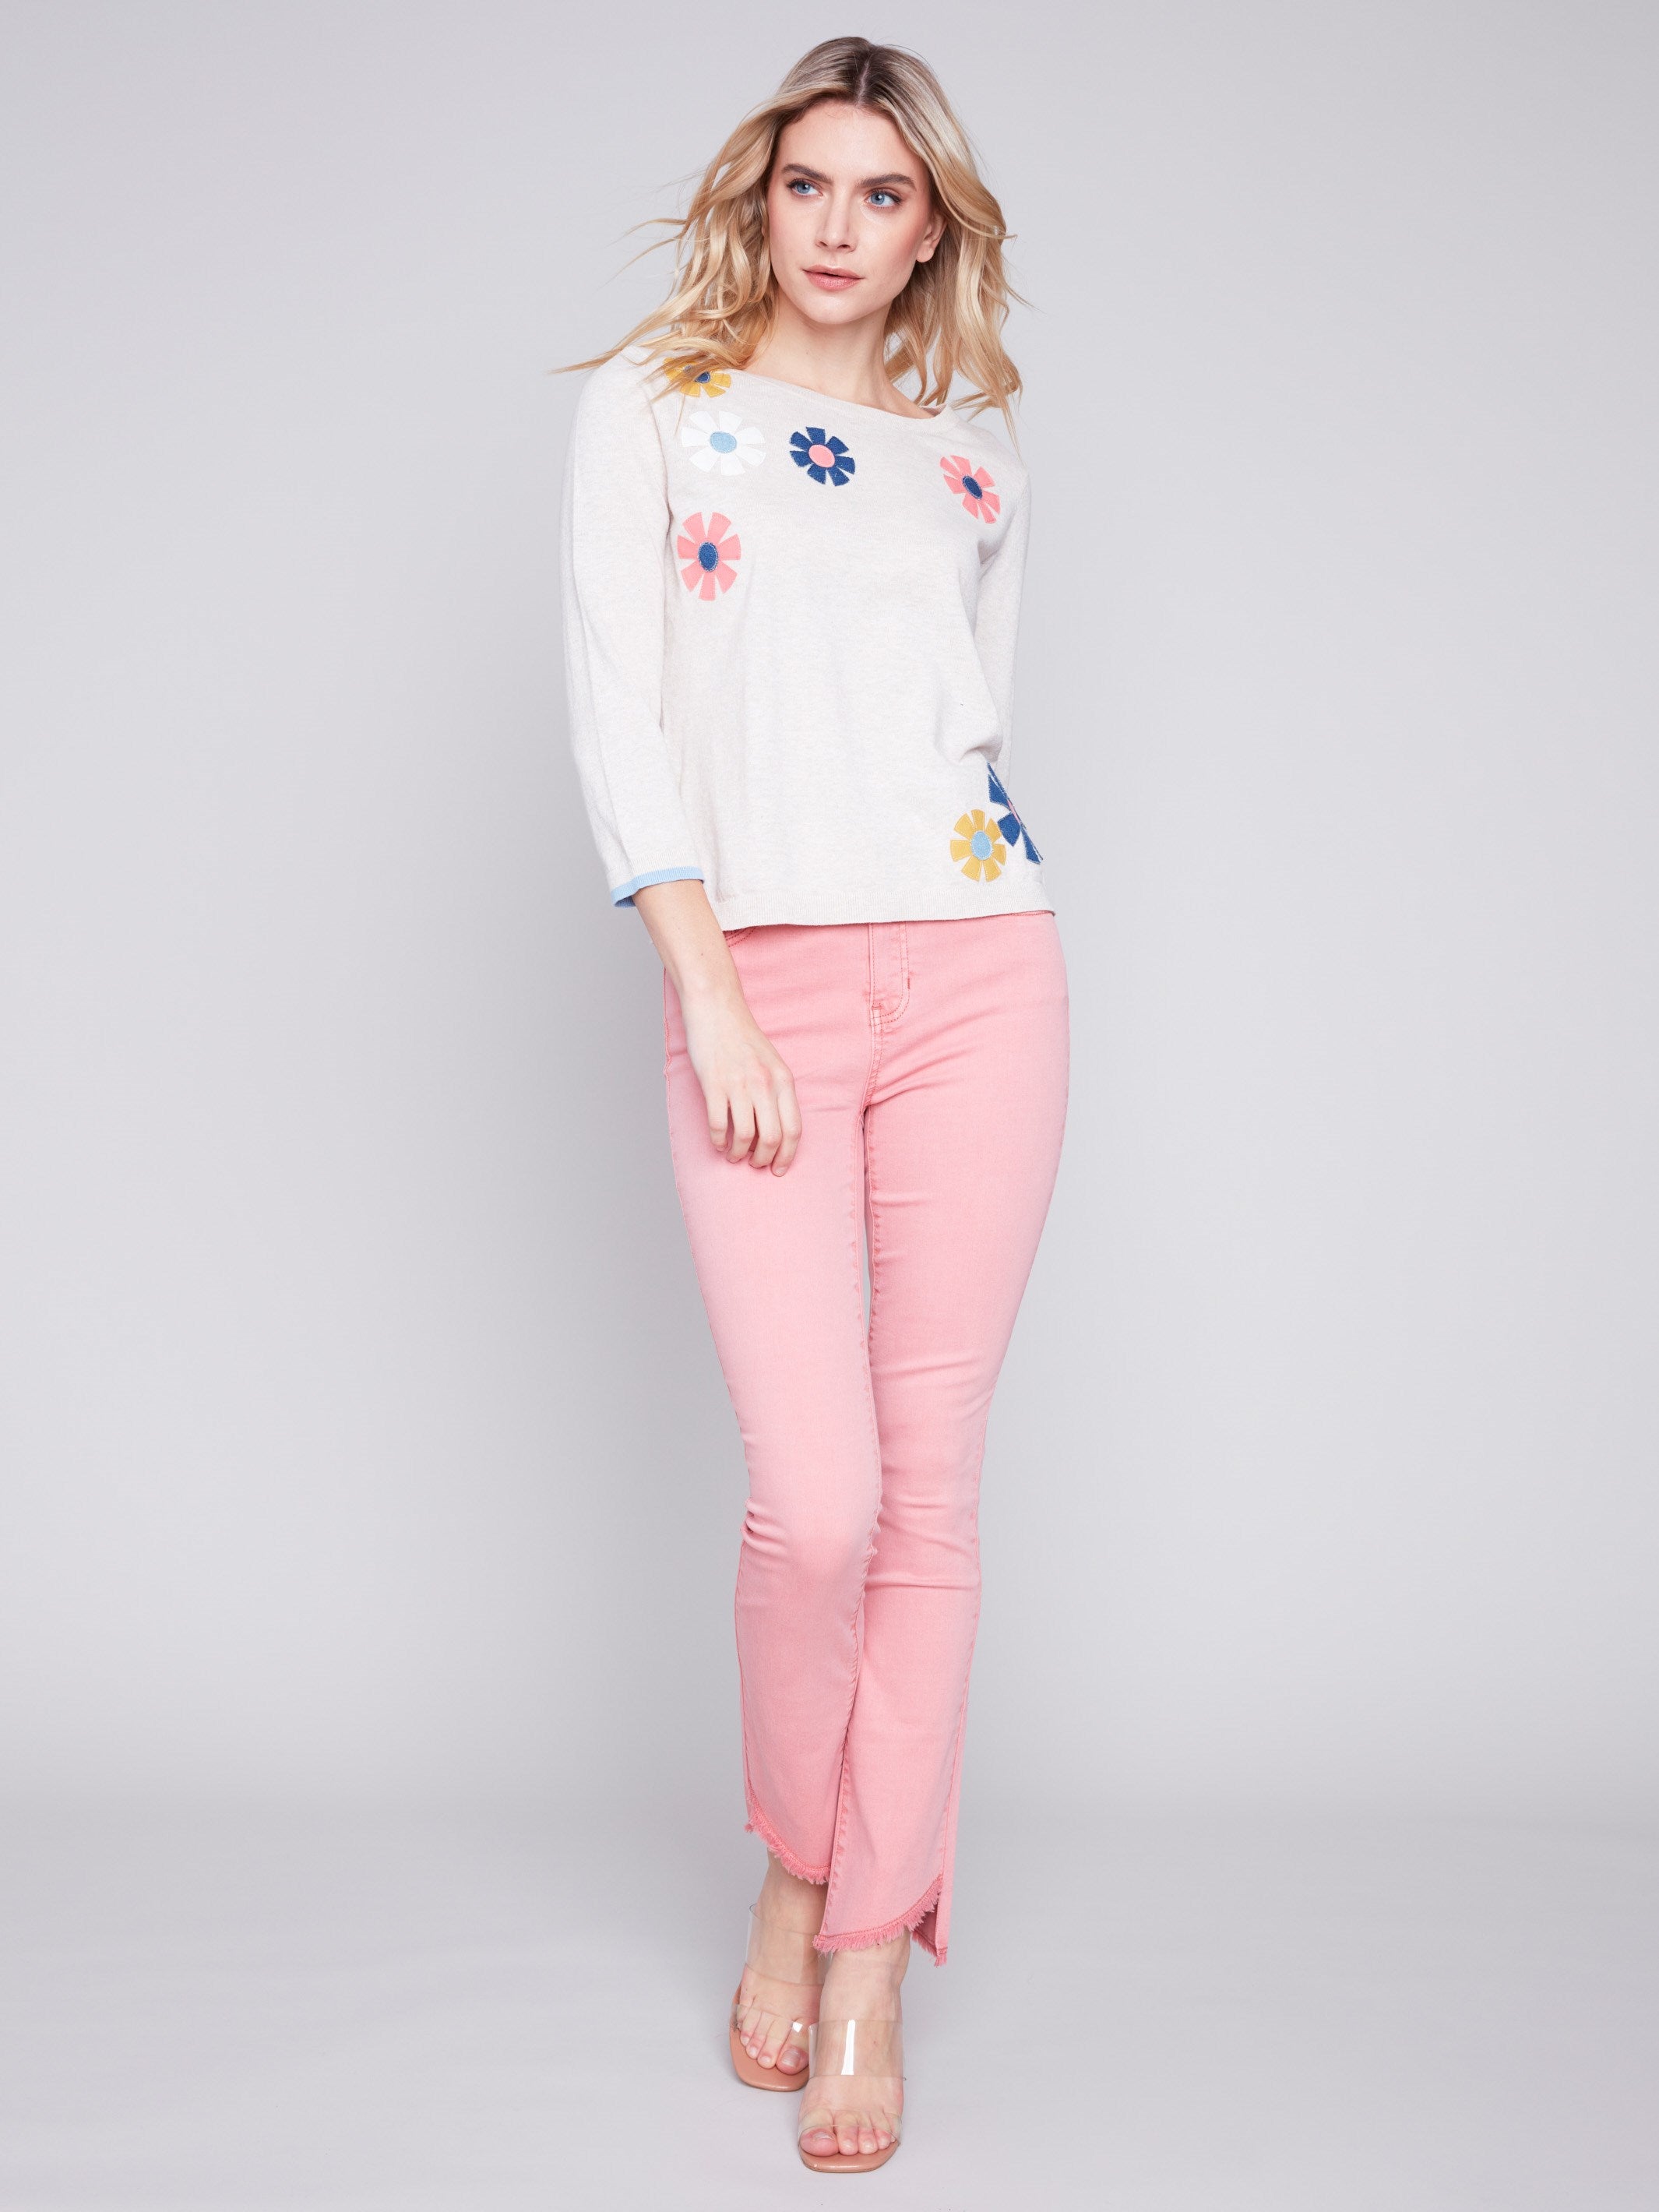 Charlie B Sweater with Flower Patches - Beige - Image 2